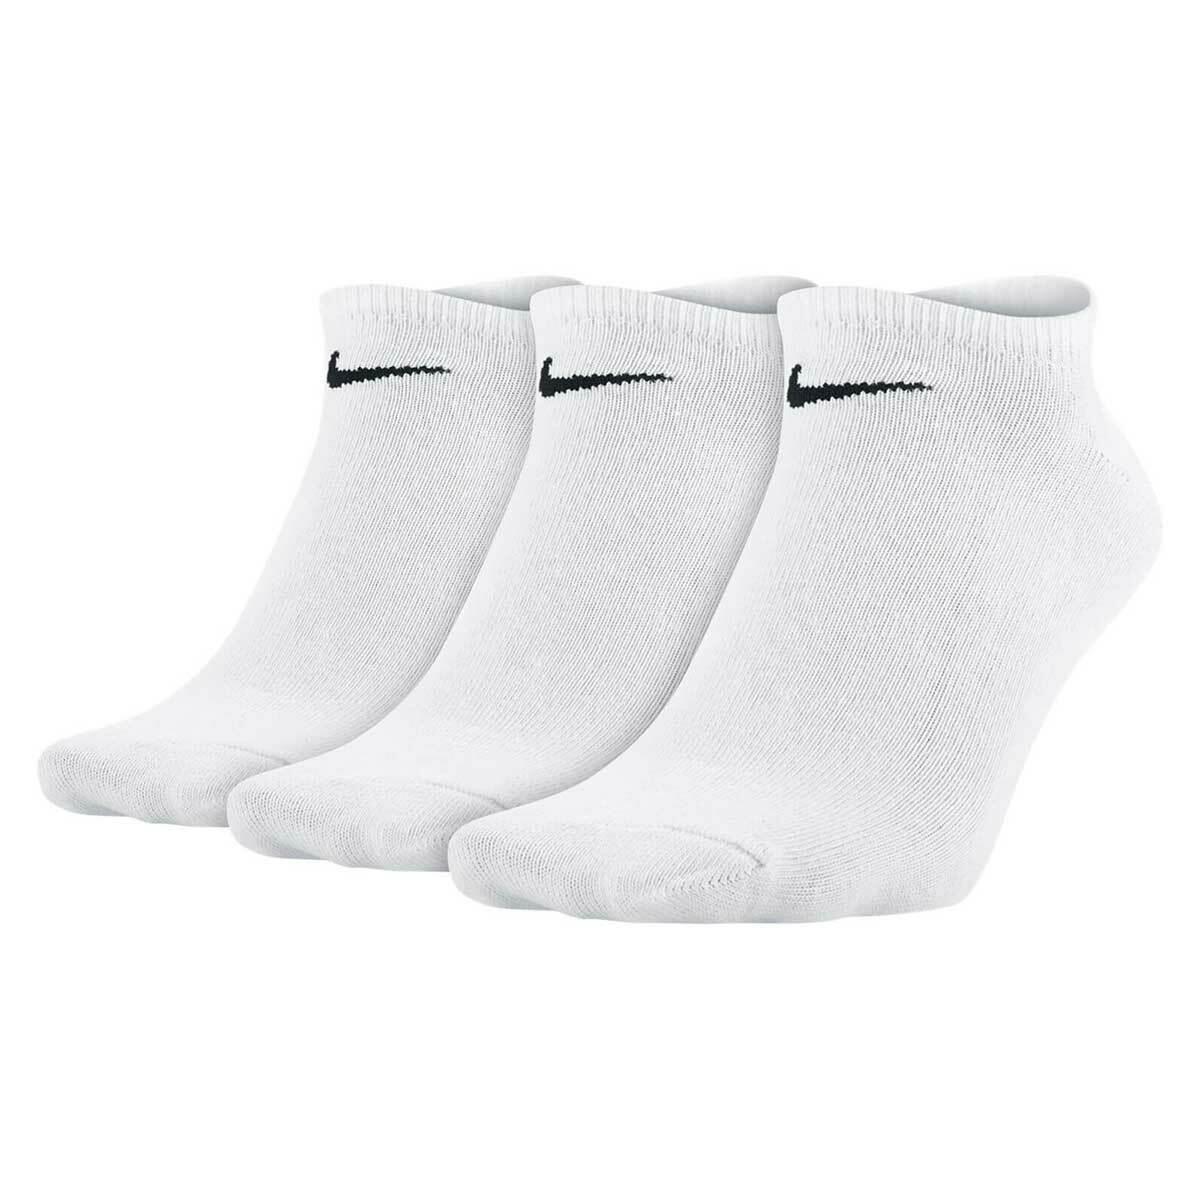 Nike Lightweight No Show - 3 Pack - The Next Pair